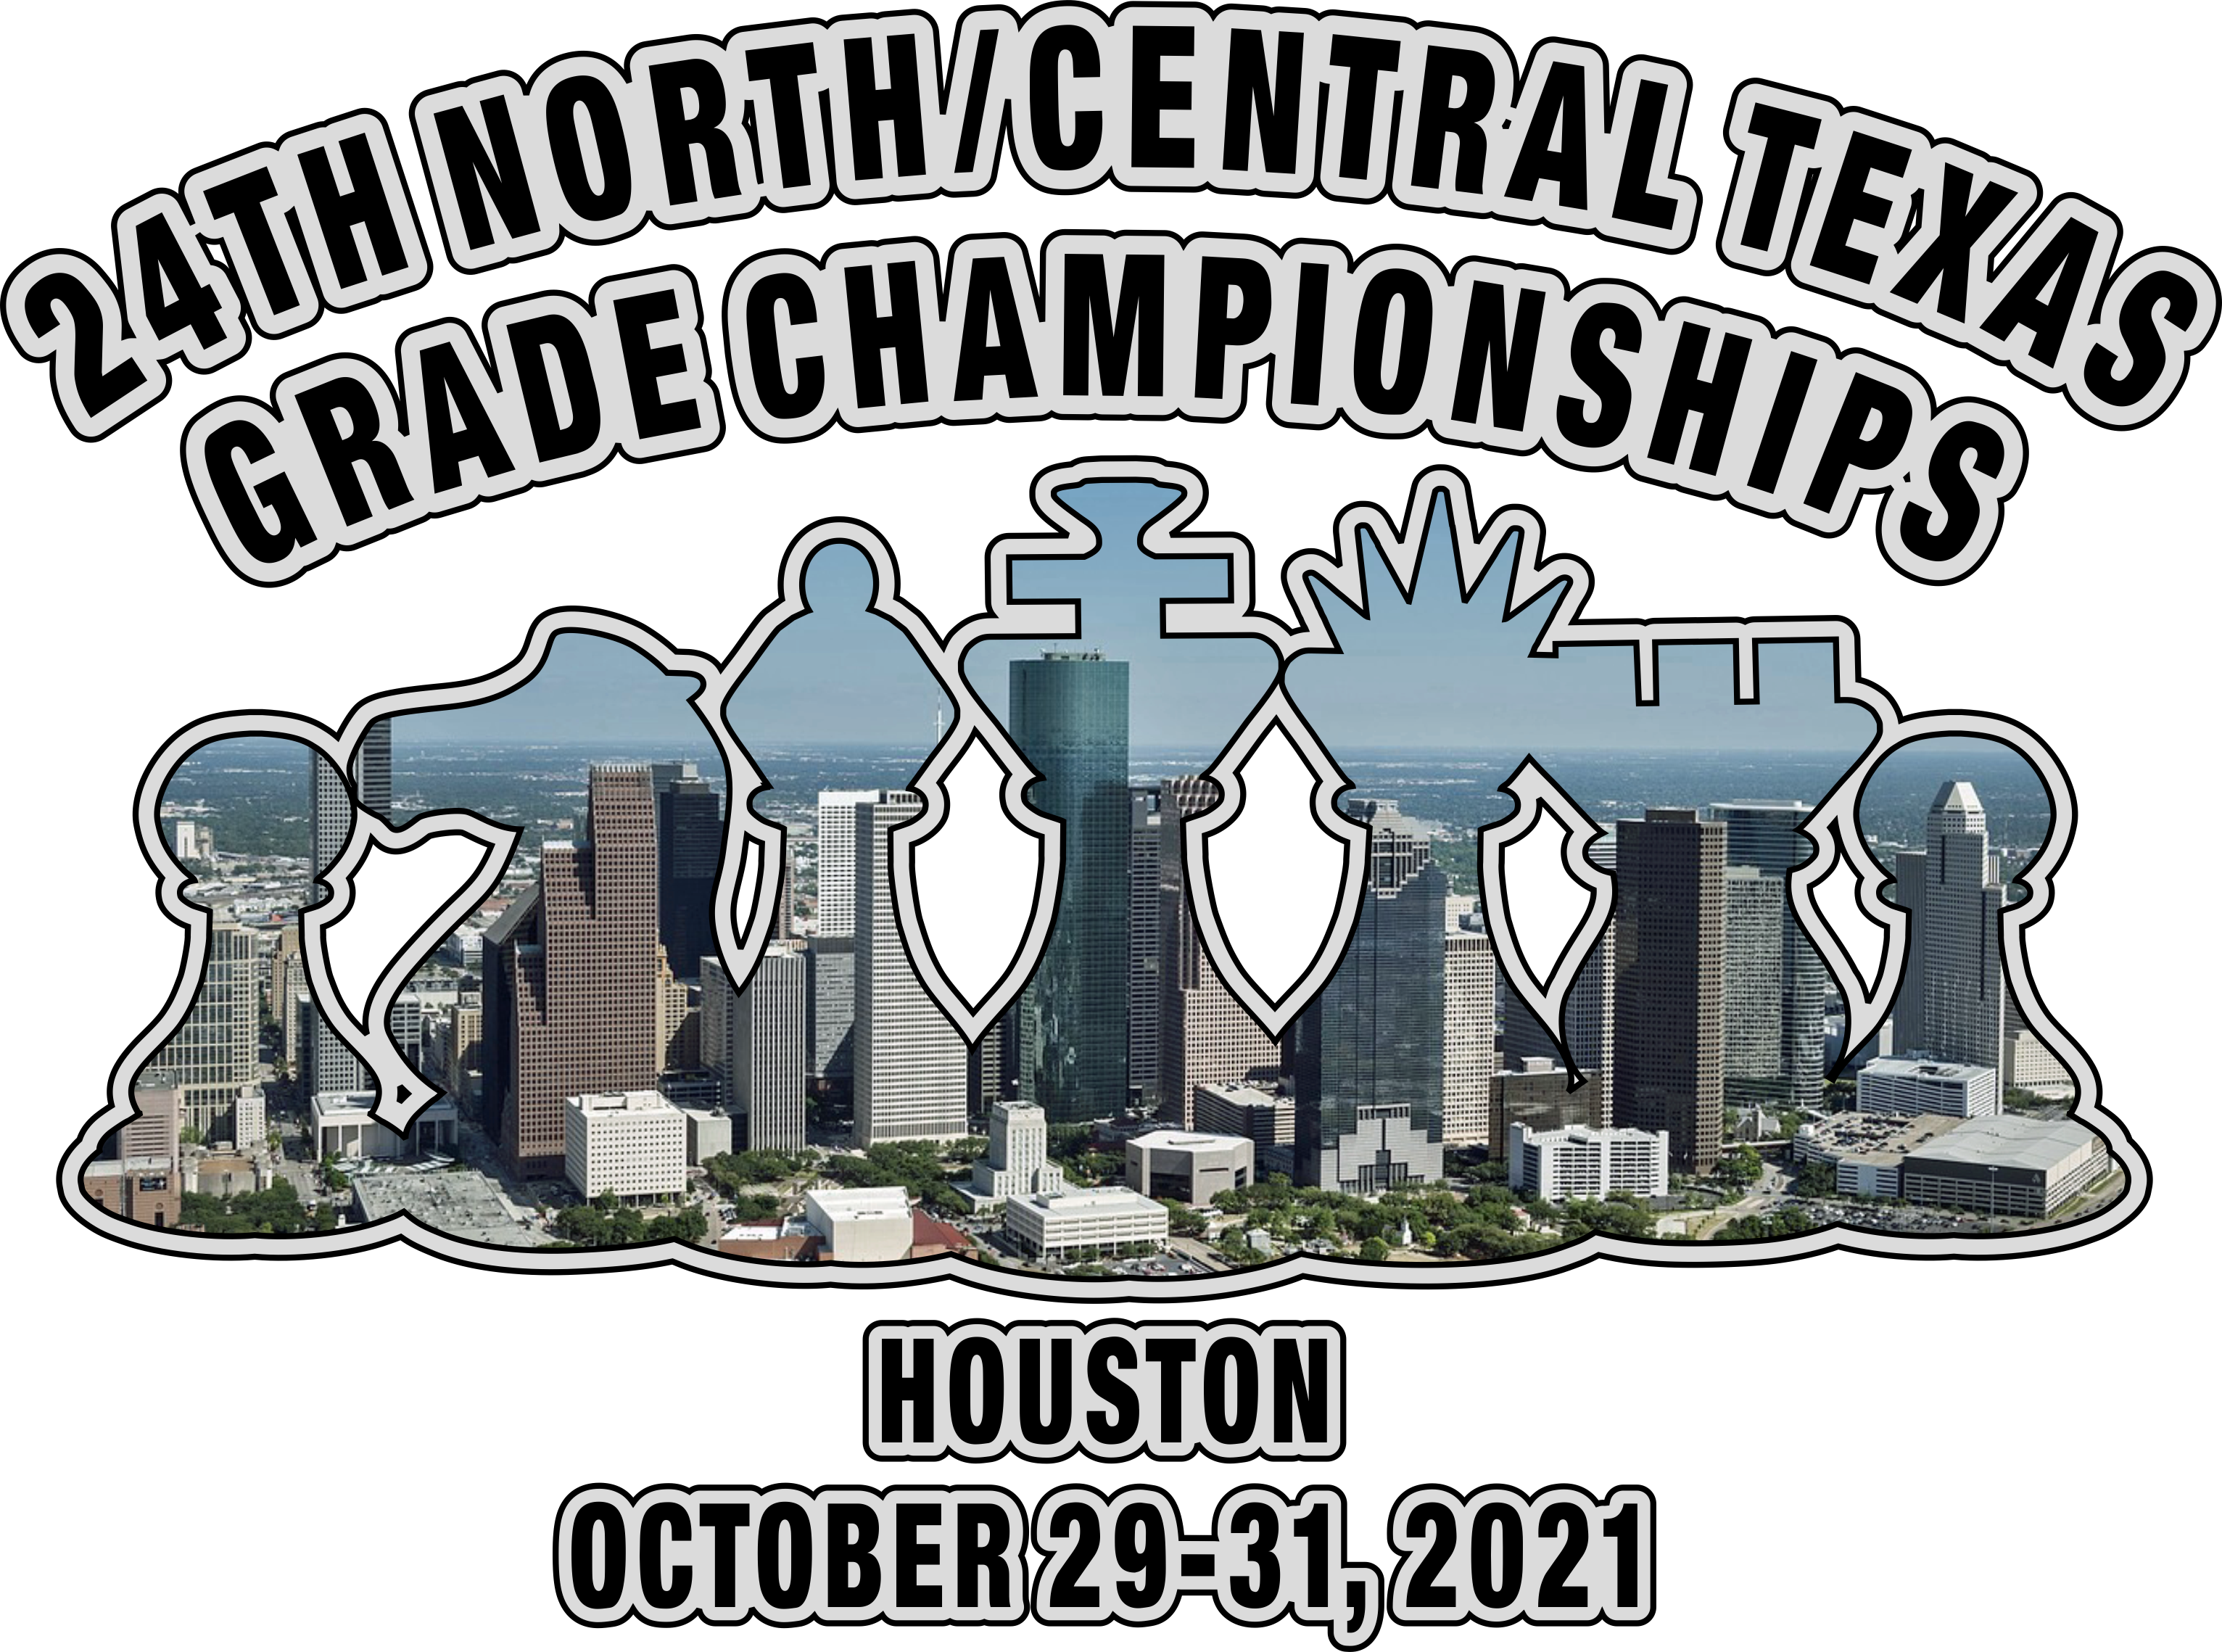 2021 US Class Championships in Houston